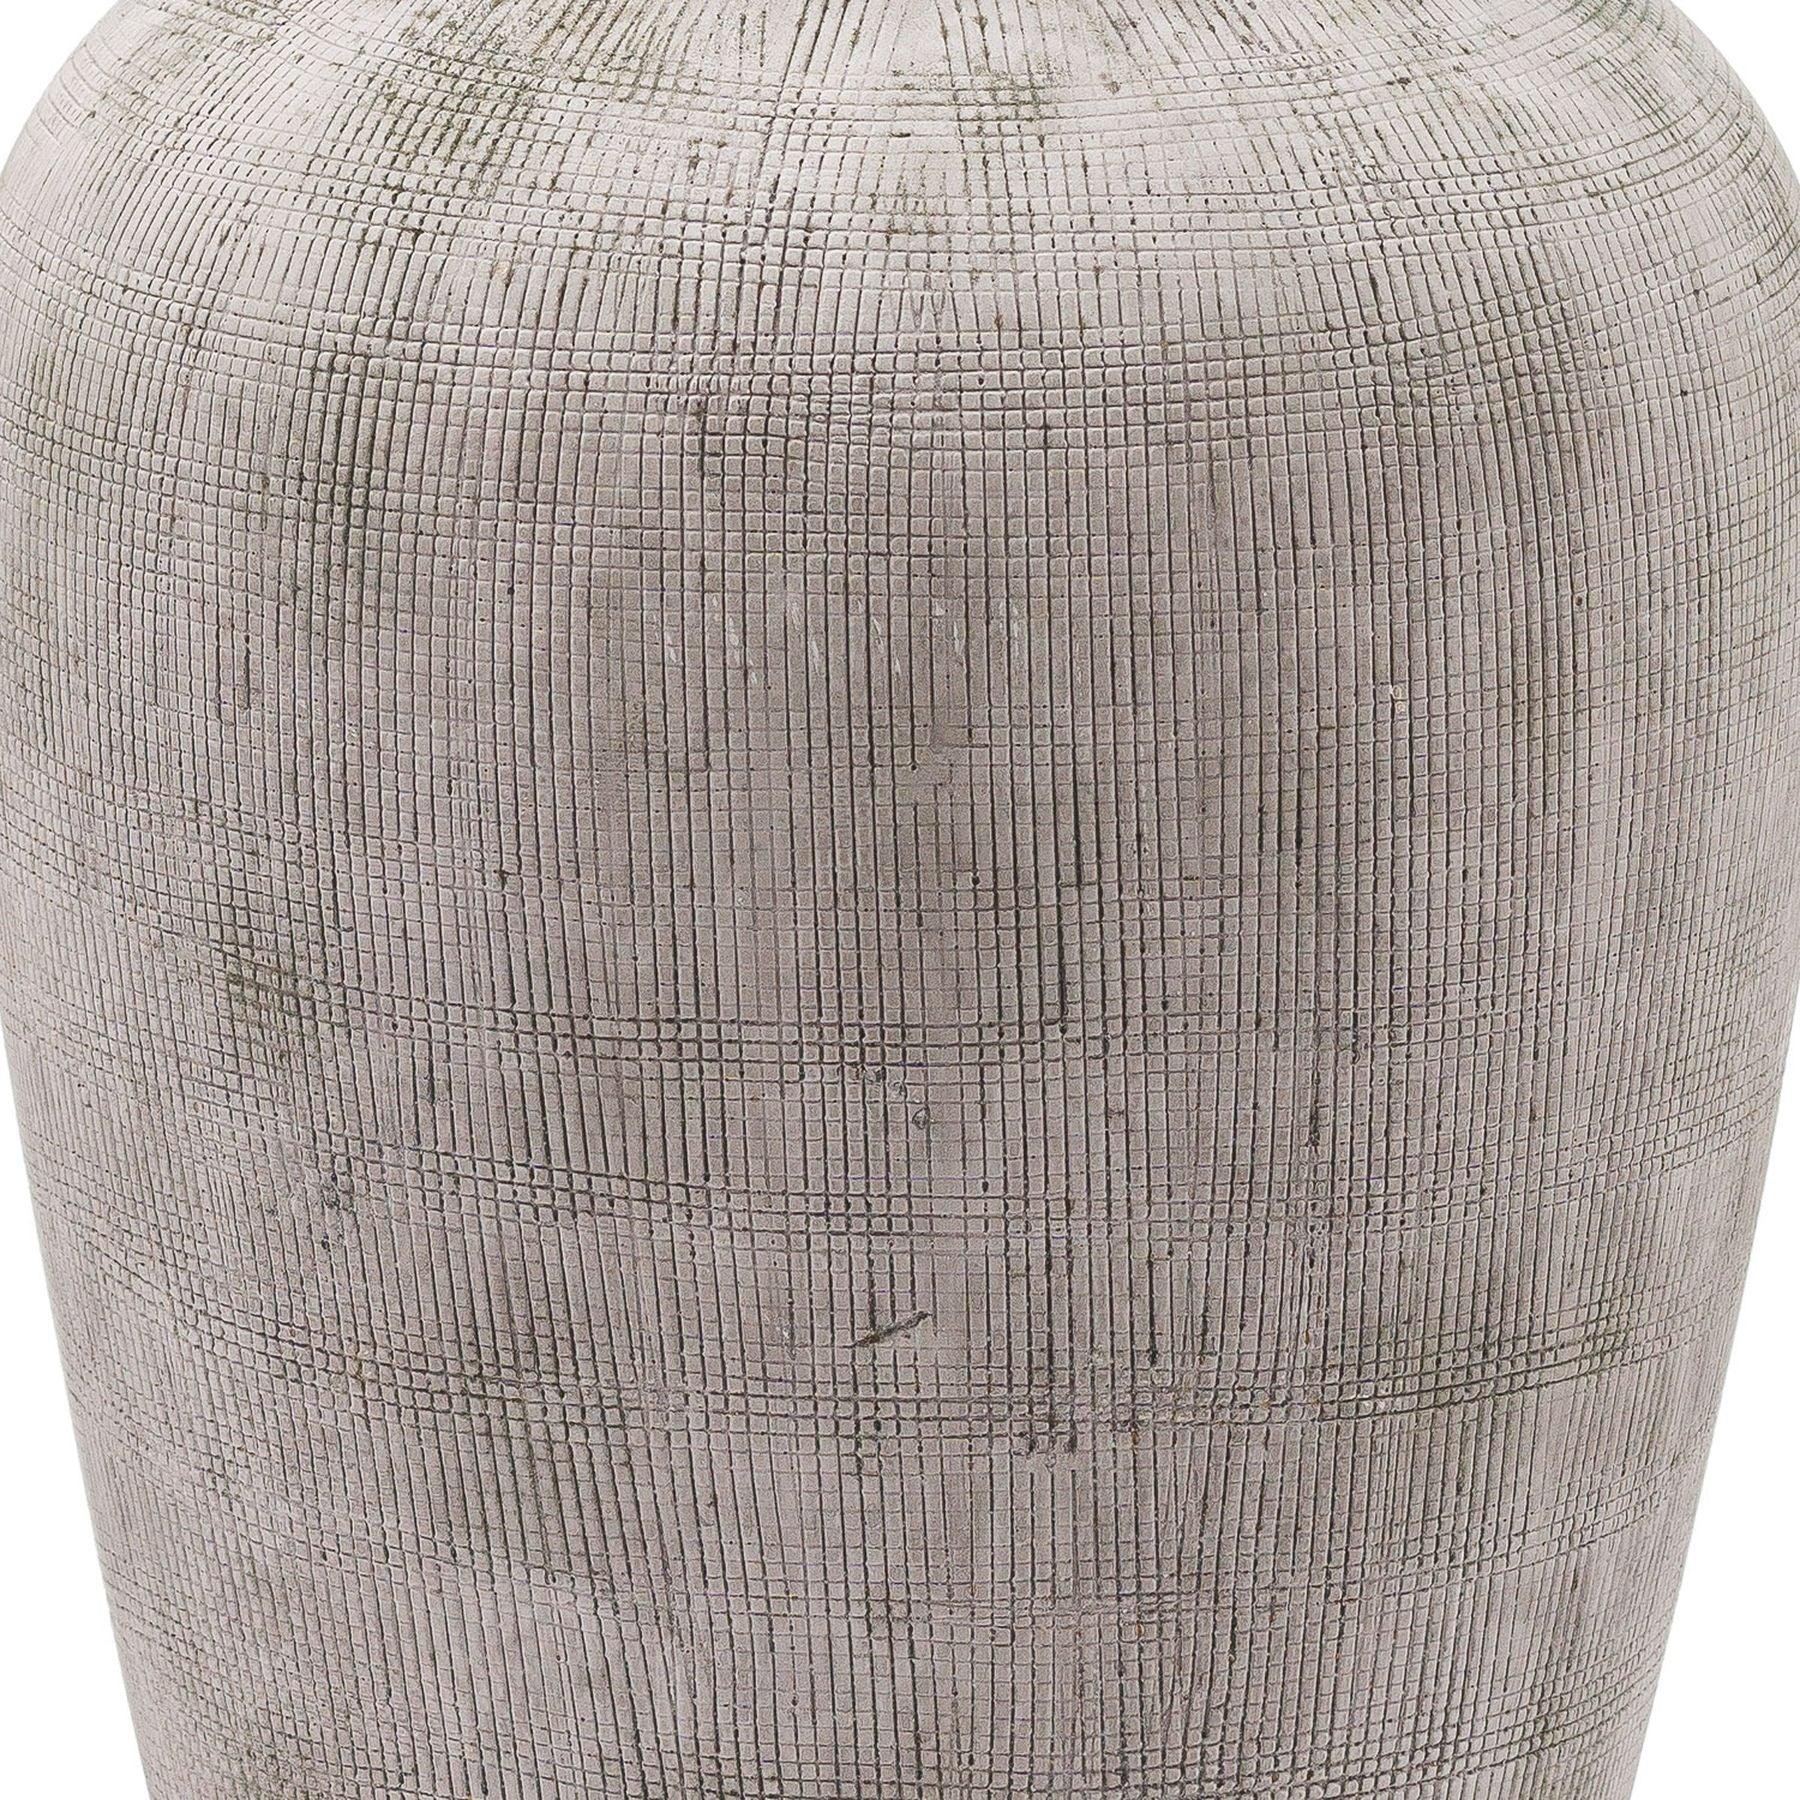 Bloomville Chours Stone Vase - Charming Spaces